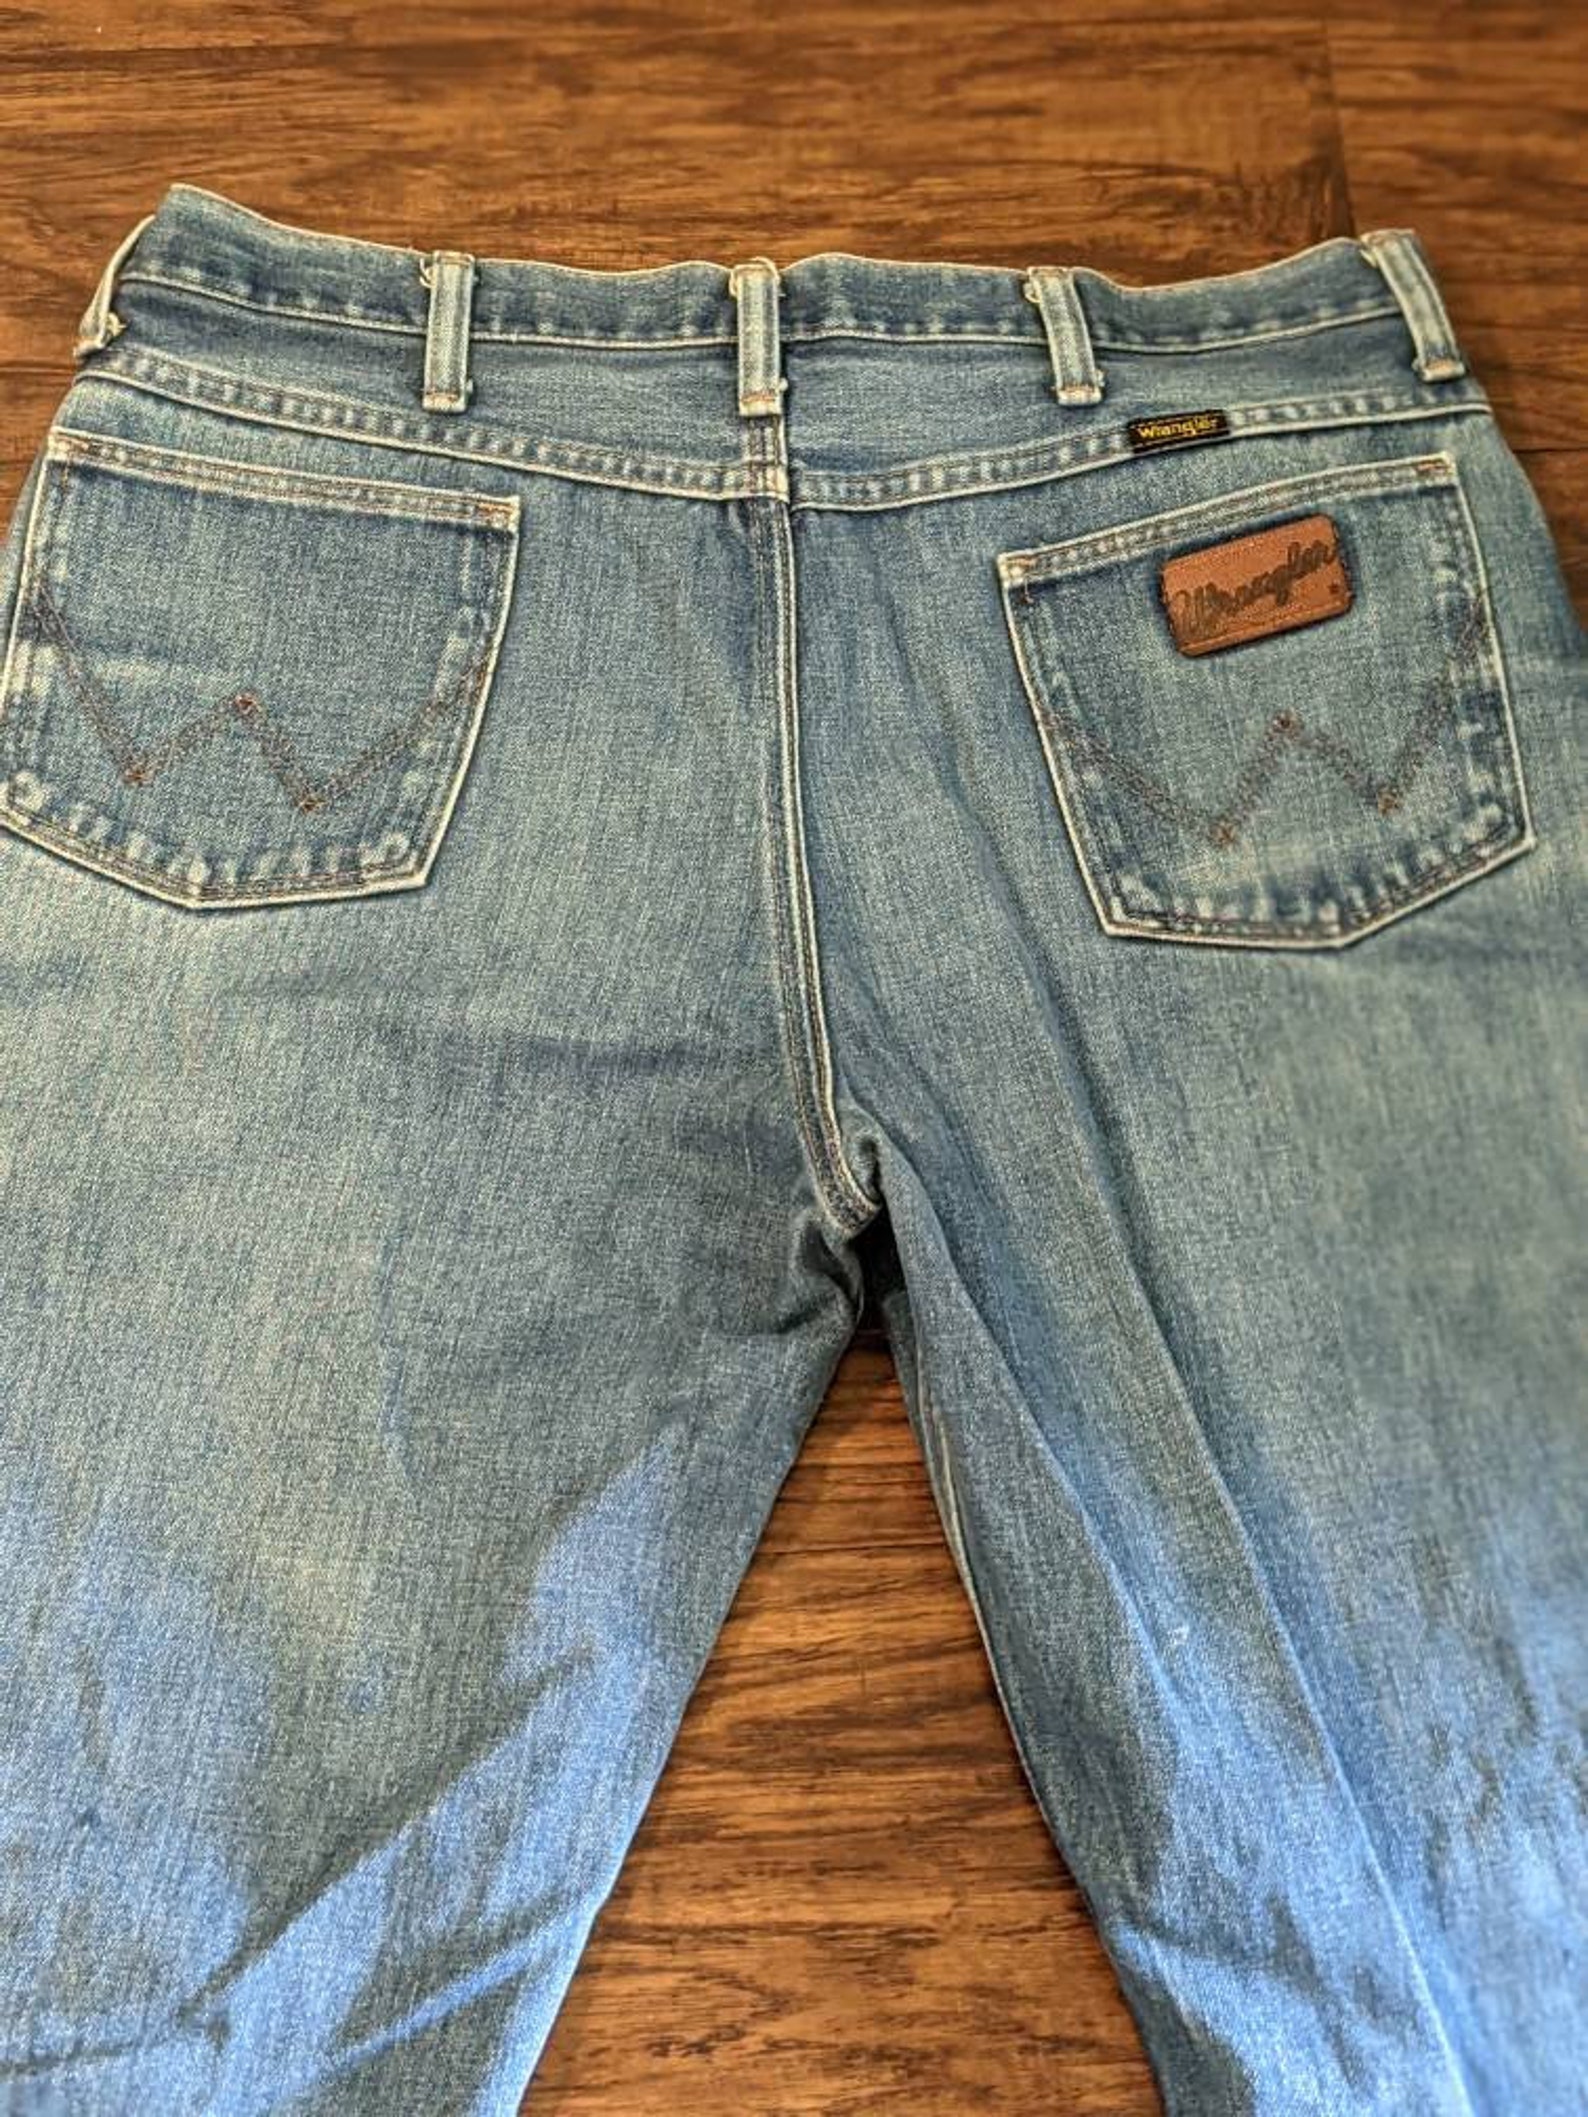 Wrangler Jeans Made in USA 1970s/80s Vintage IDEAL Zipper | Etsy